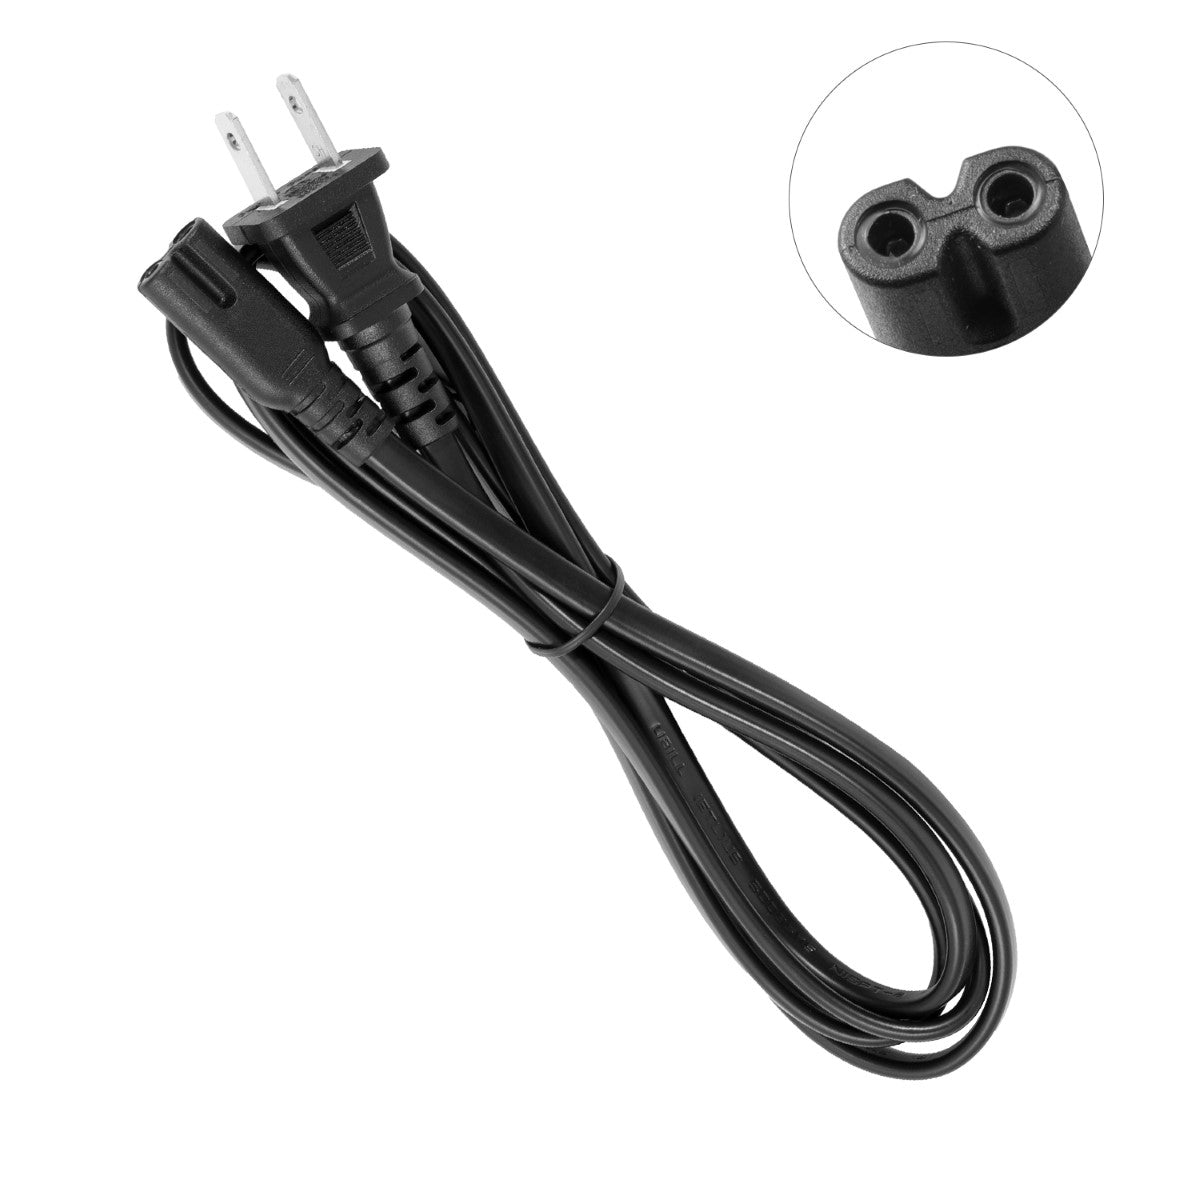 Power Cable  for HP ENVY Pro 6455/6455e All-in-One Printer.